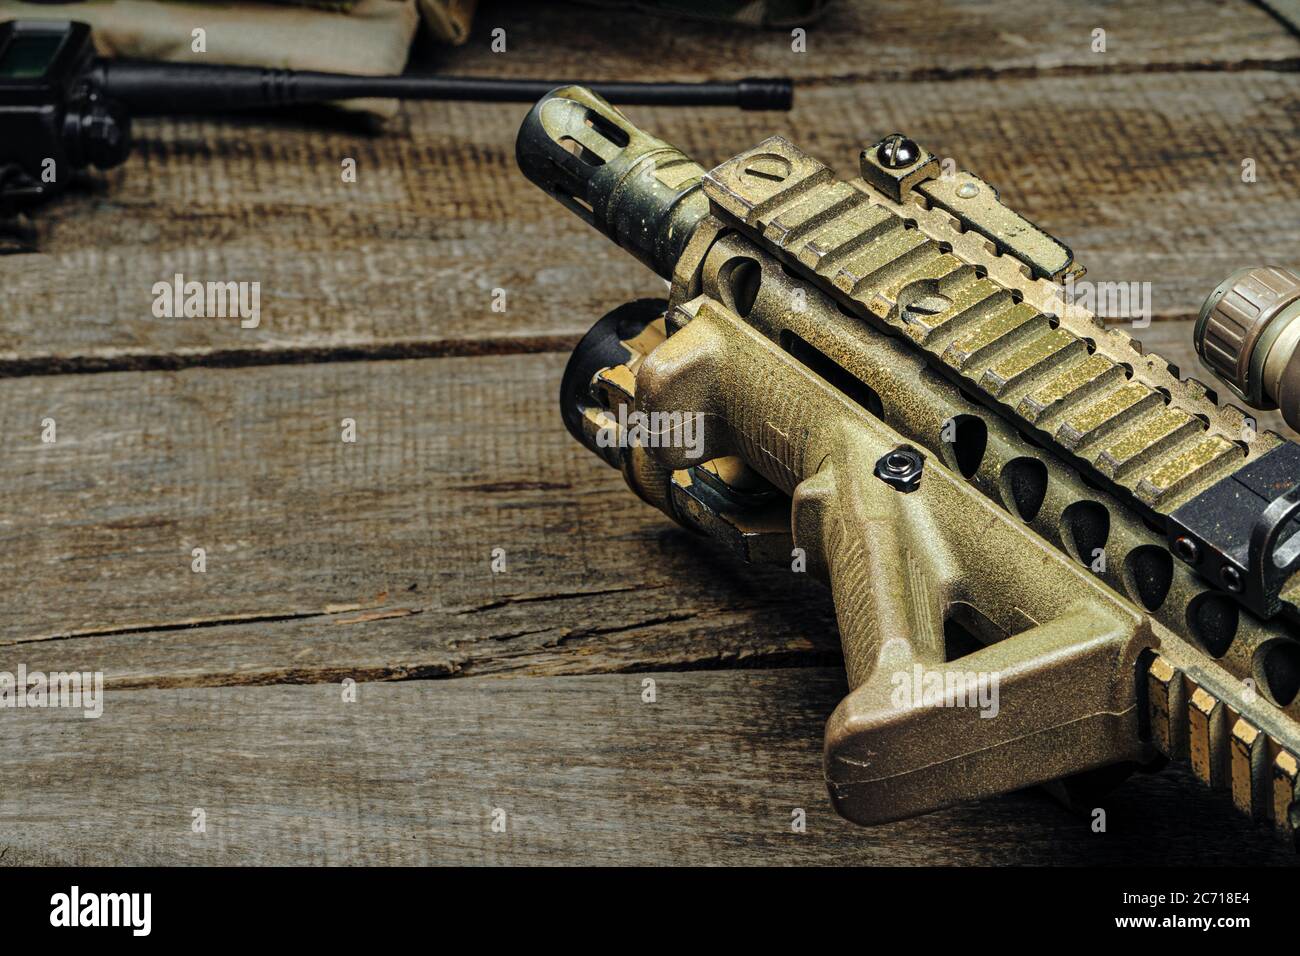 Close up photo of M16 rifle on wooden board Stock Photo